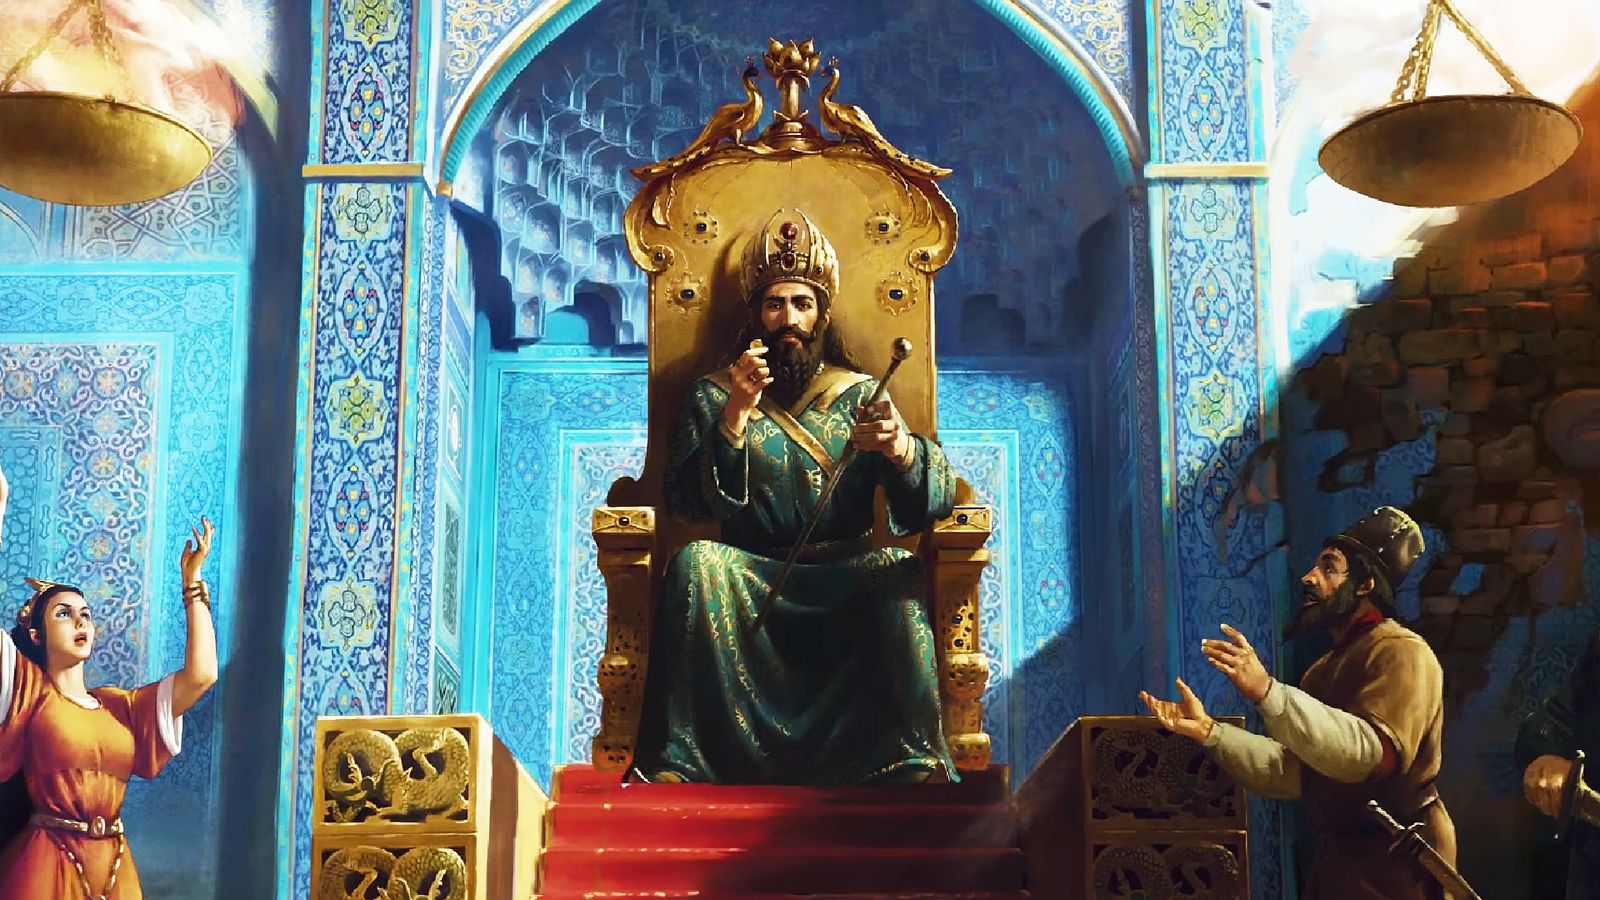 Crusader Kings 3 Persian King sits on raised golden throne, surrounded by subjects, in front of a bright blue wall with archway.